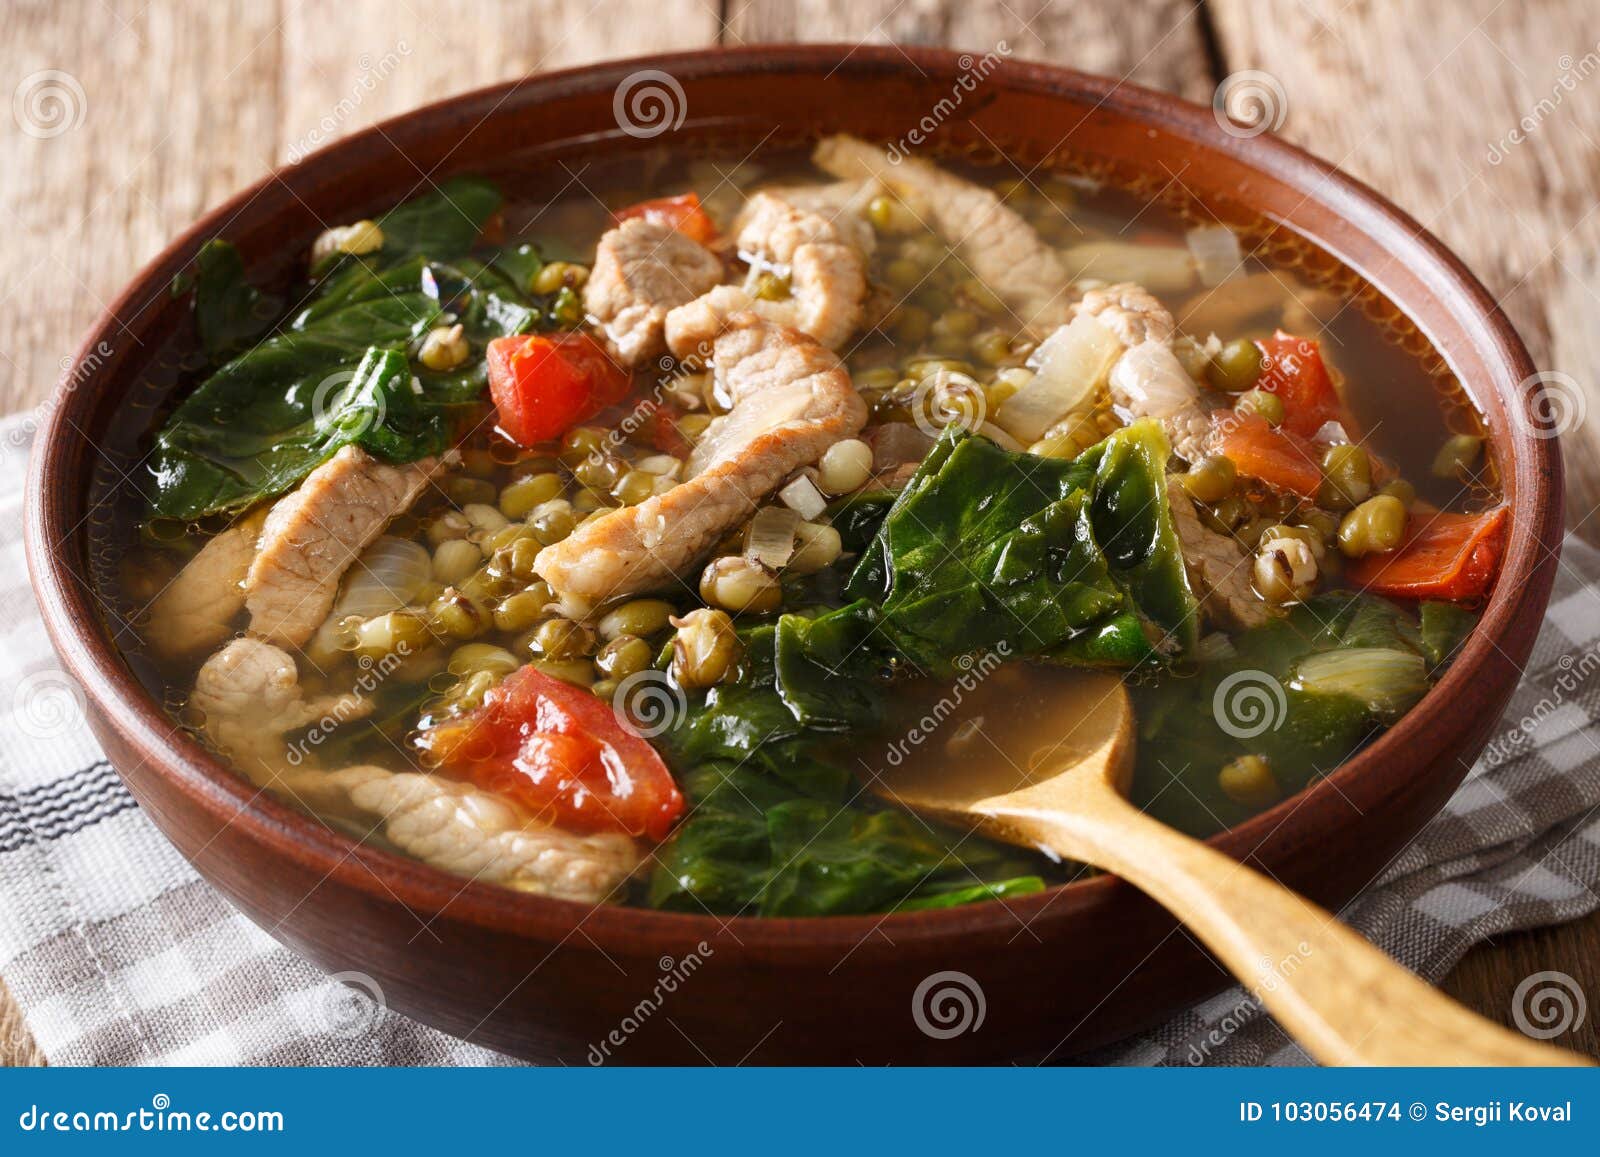 Philippine Food: Mung Beans Soup Close-up in a Bowl. Horizontal Stock ...